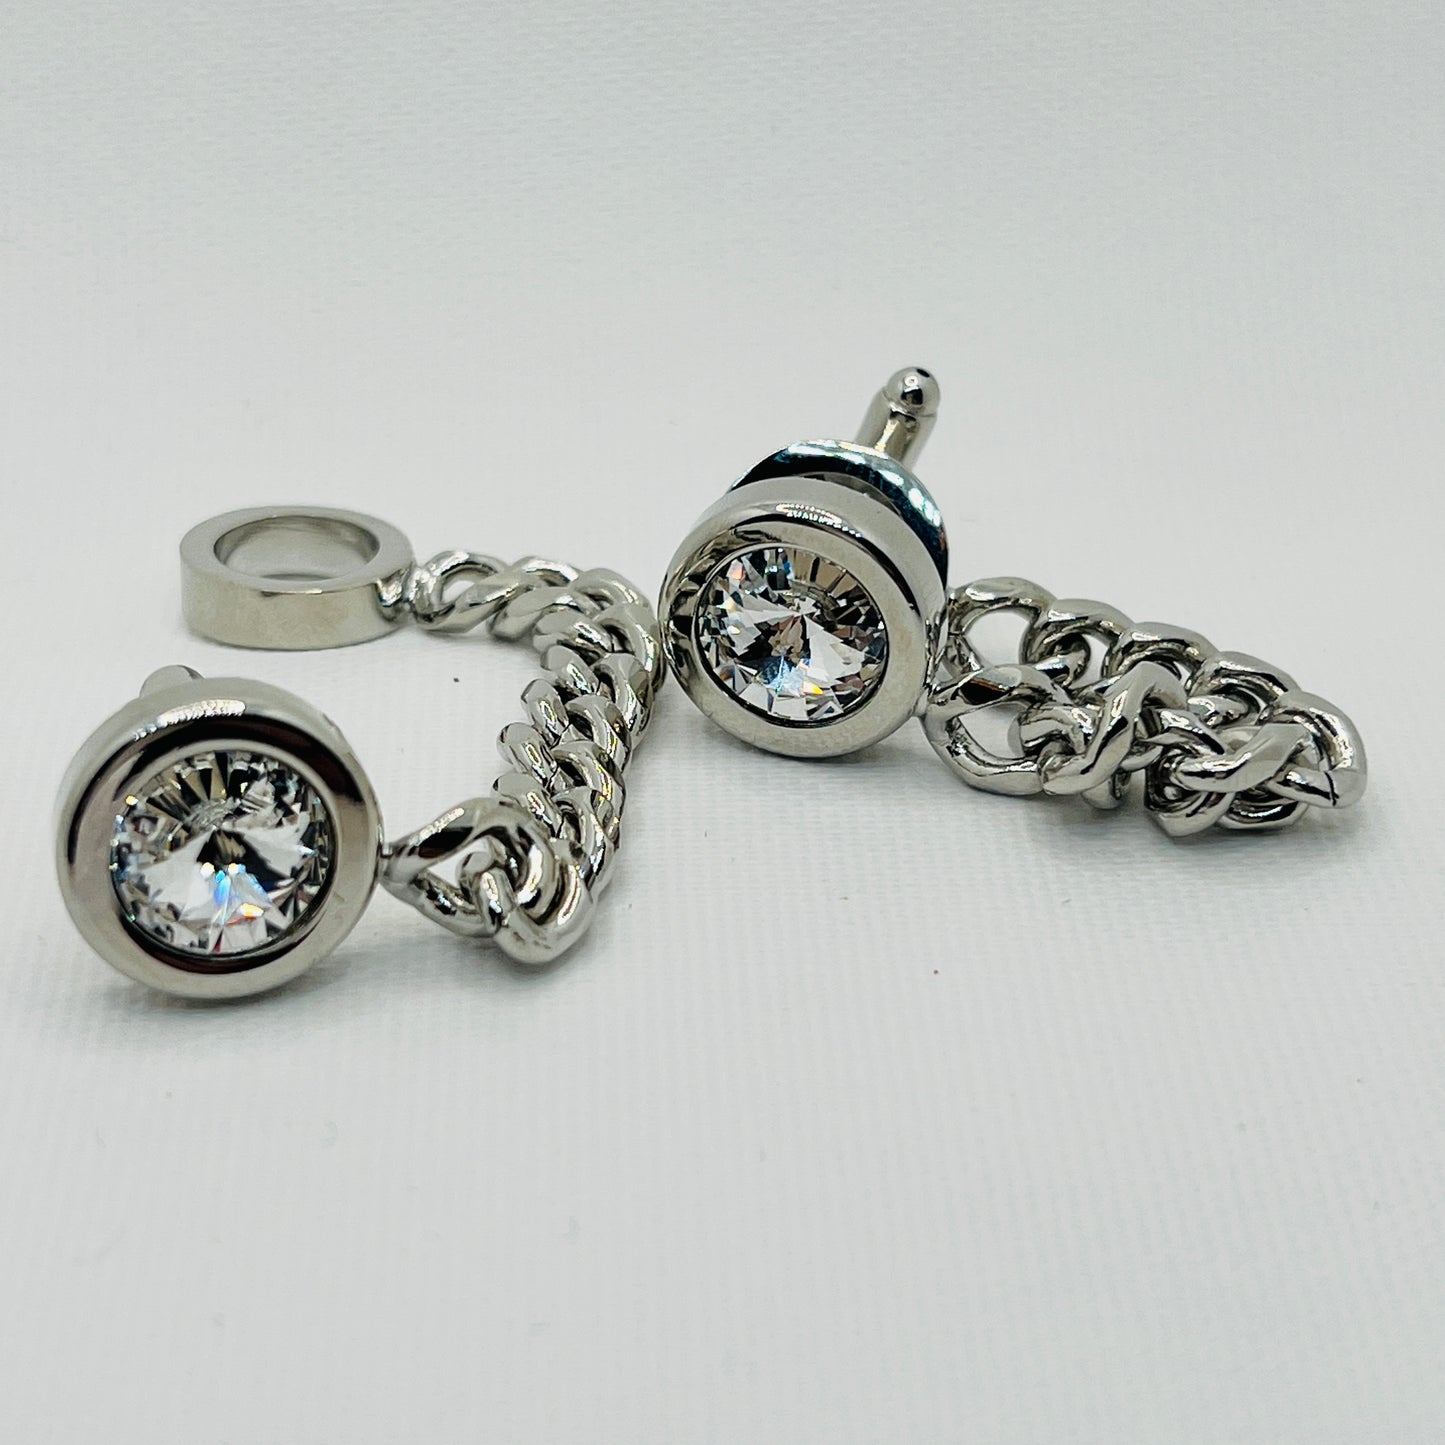 Tasker & Shaw | Luxury Menswear | Round silver cufflinks with crystal face and chain cuff protector